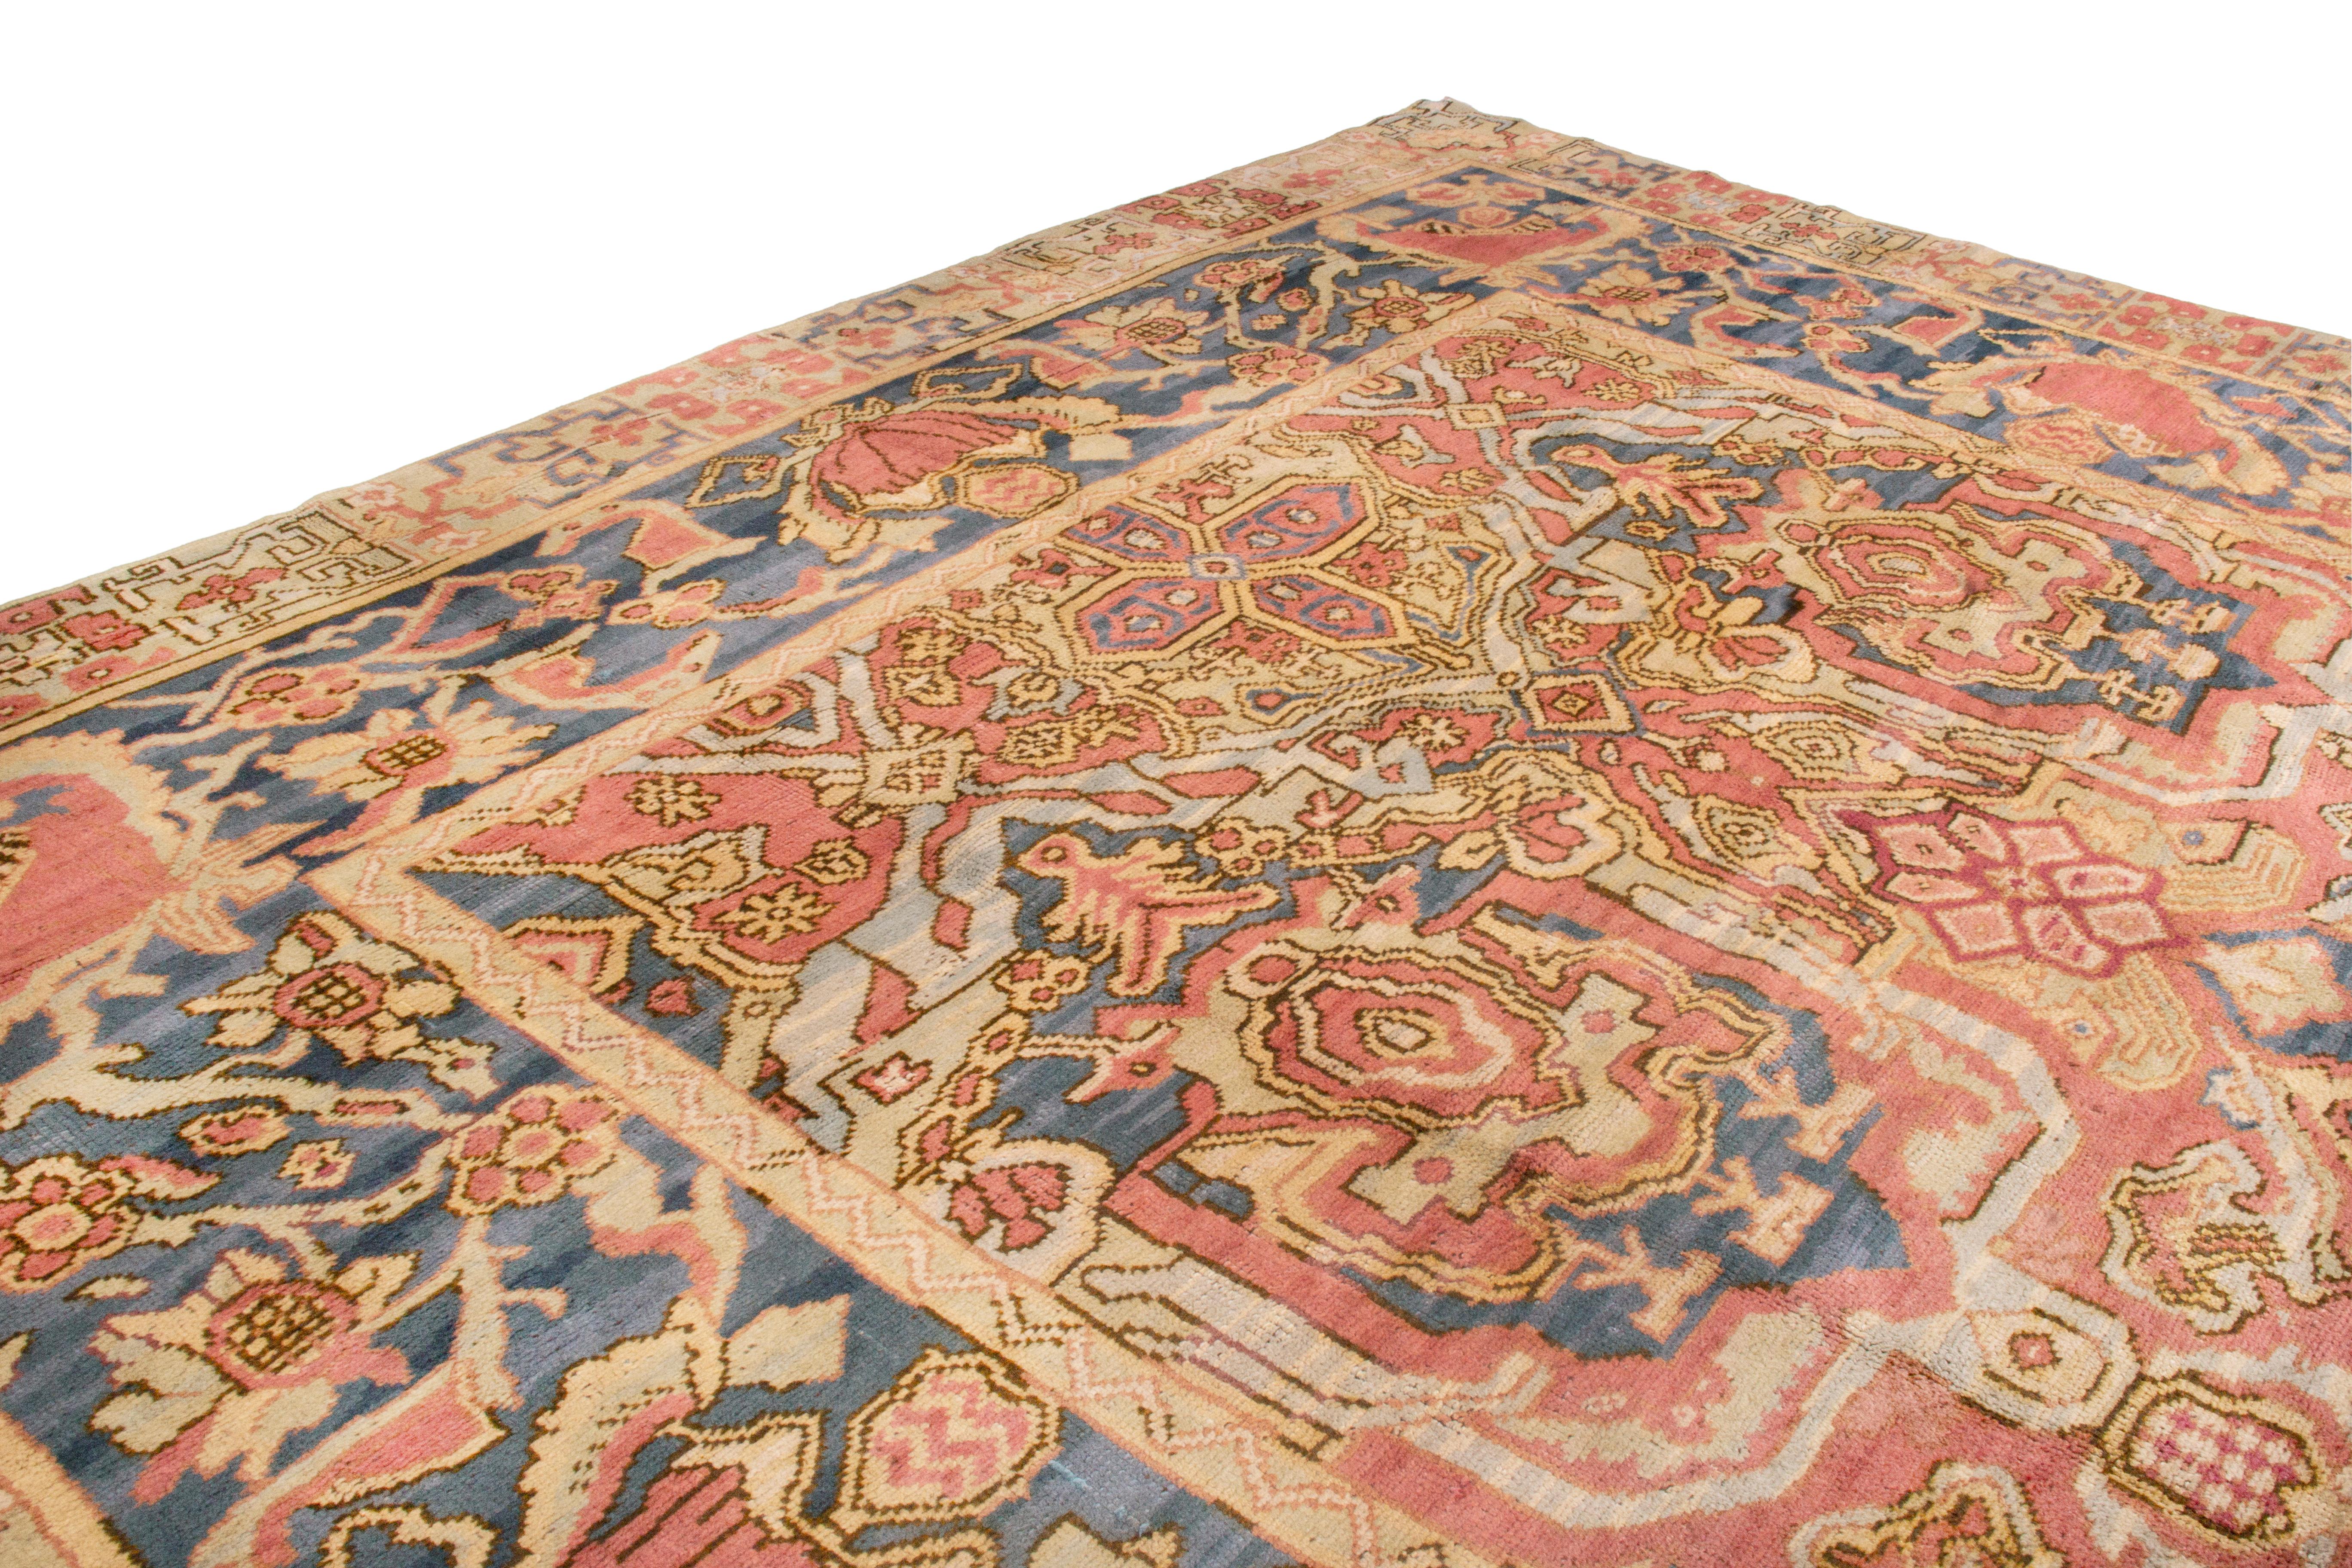 This antique arts & crafts wool rug is an early Spanish piece from 1900, featuring an all-over floral design with lighter pastel red, royal blue and tan gold dye in large scale and pristine condition. Complementing the intricate kaleidoscopic